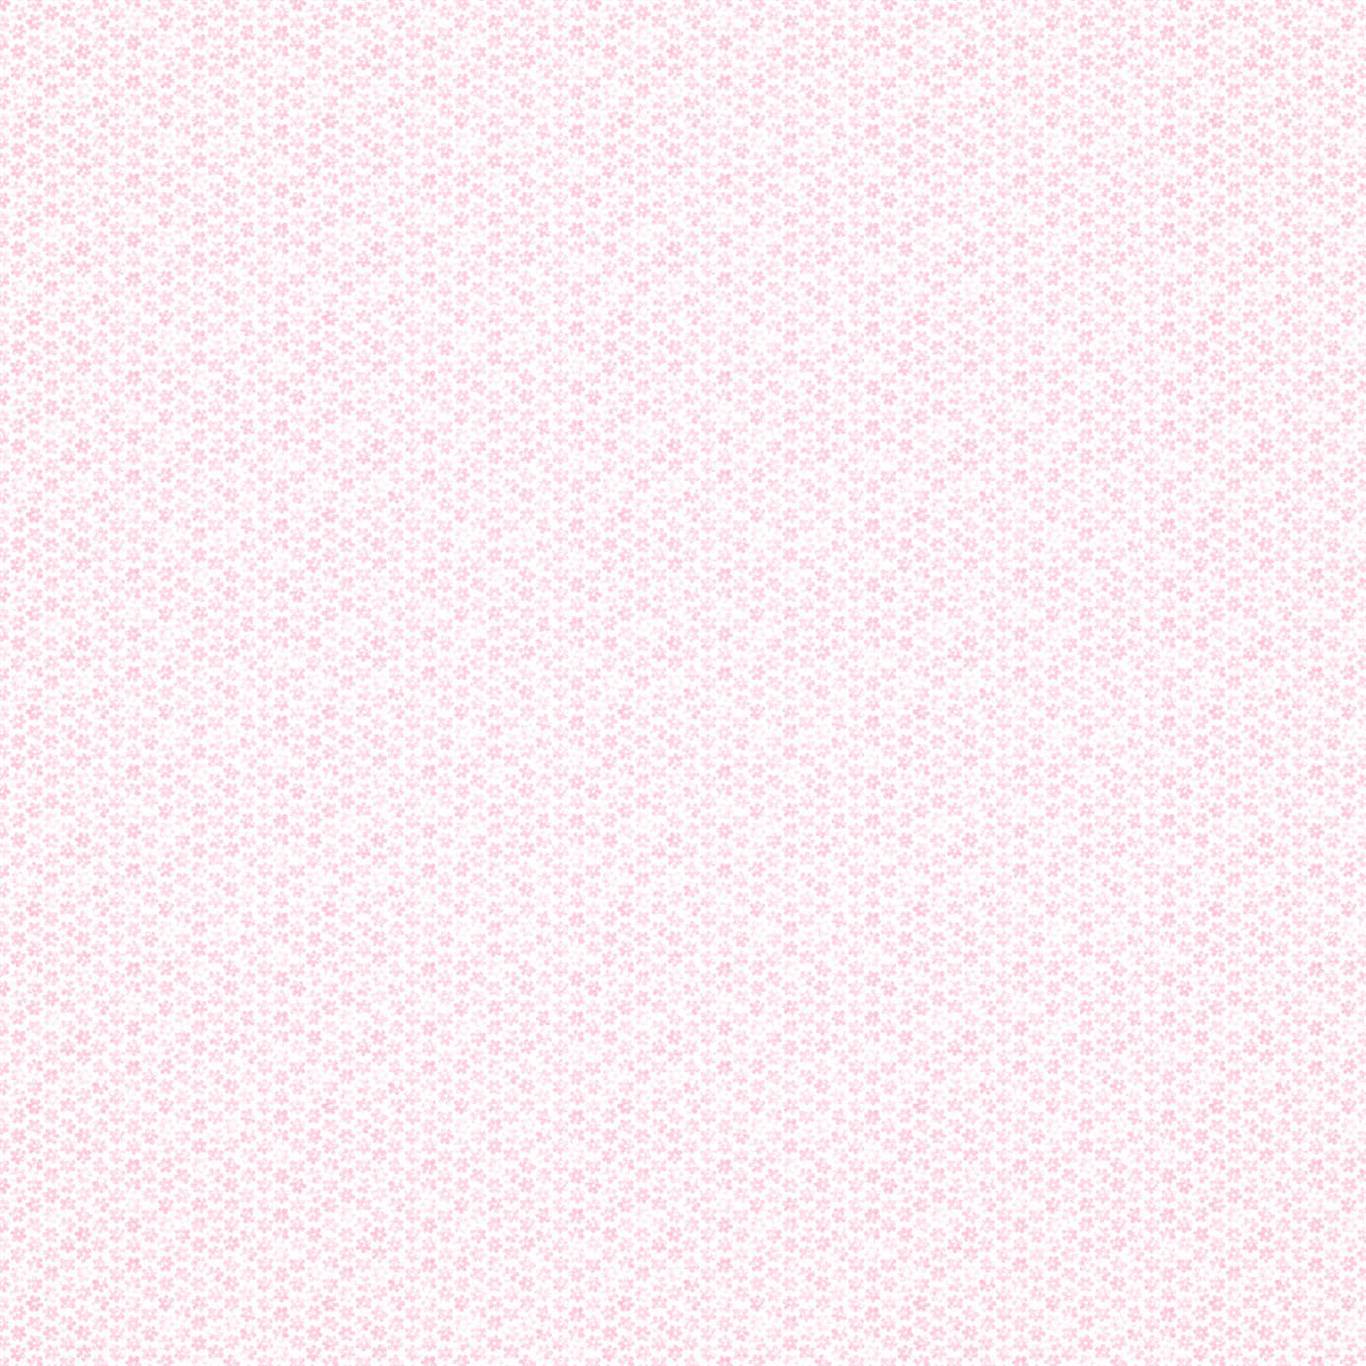 All About Me 110550 Ditsy Daisy Soft Pink Wallpaper HLTF112656 by Harlequin